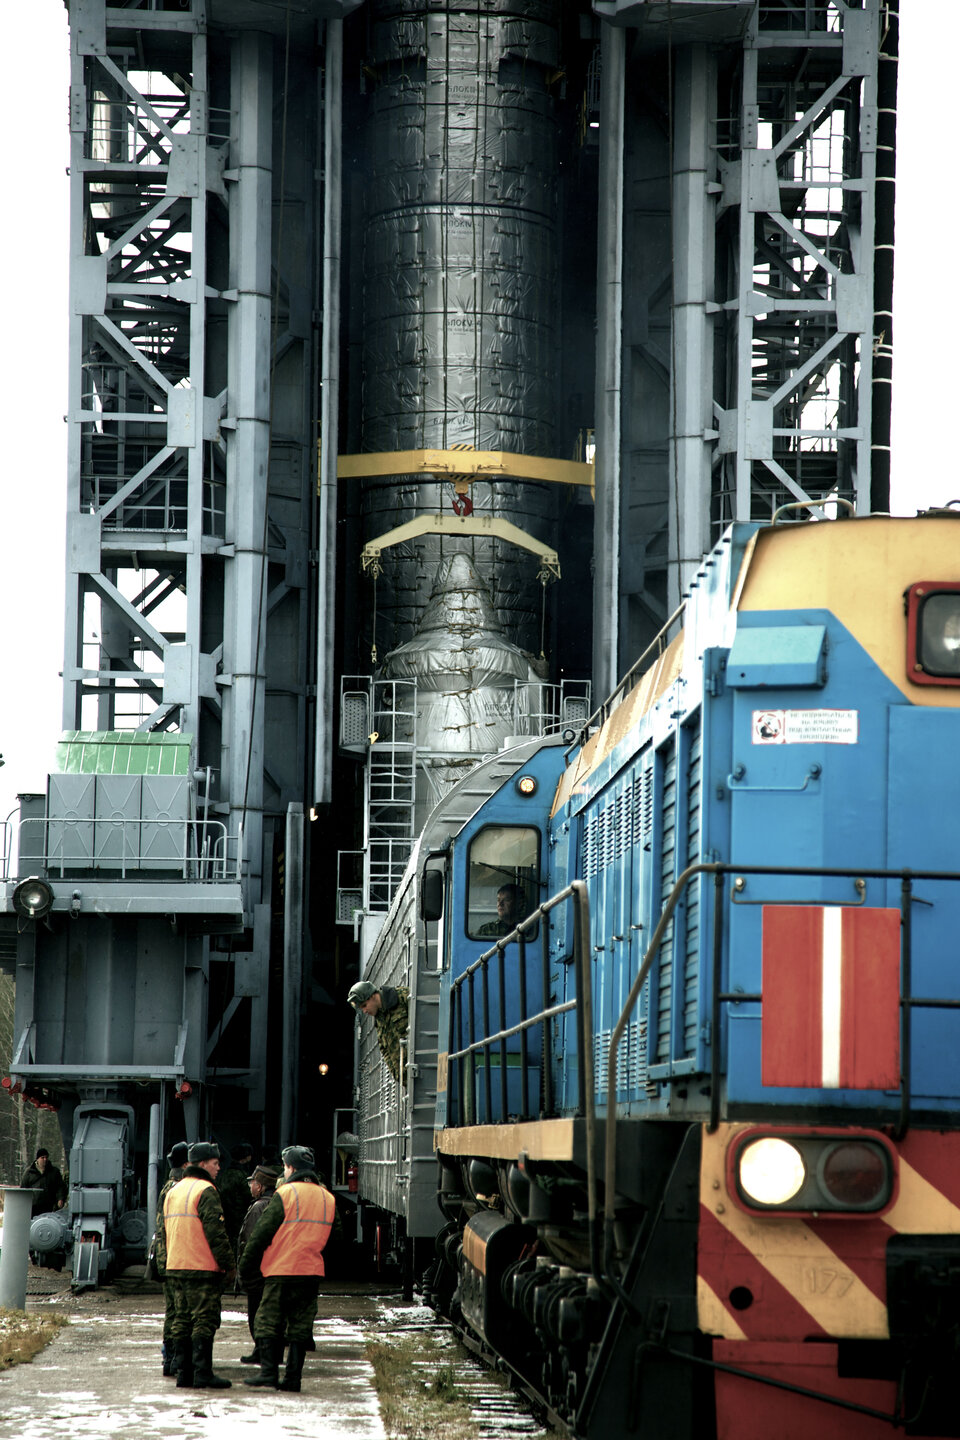 Upper composite arrives at launch pad